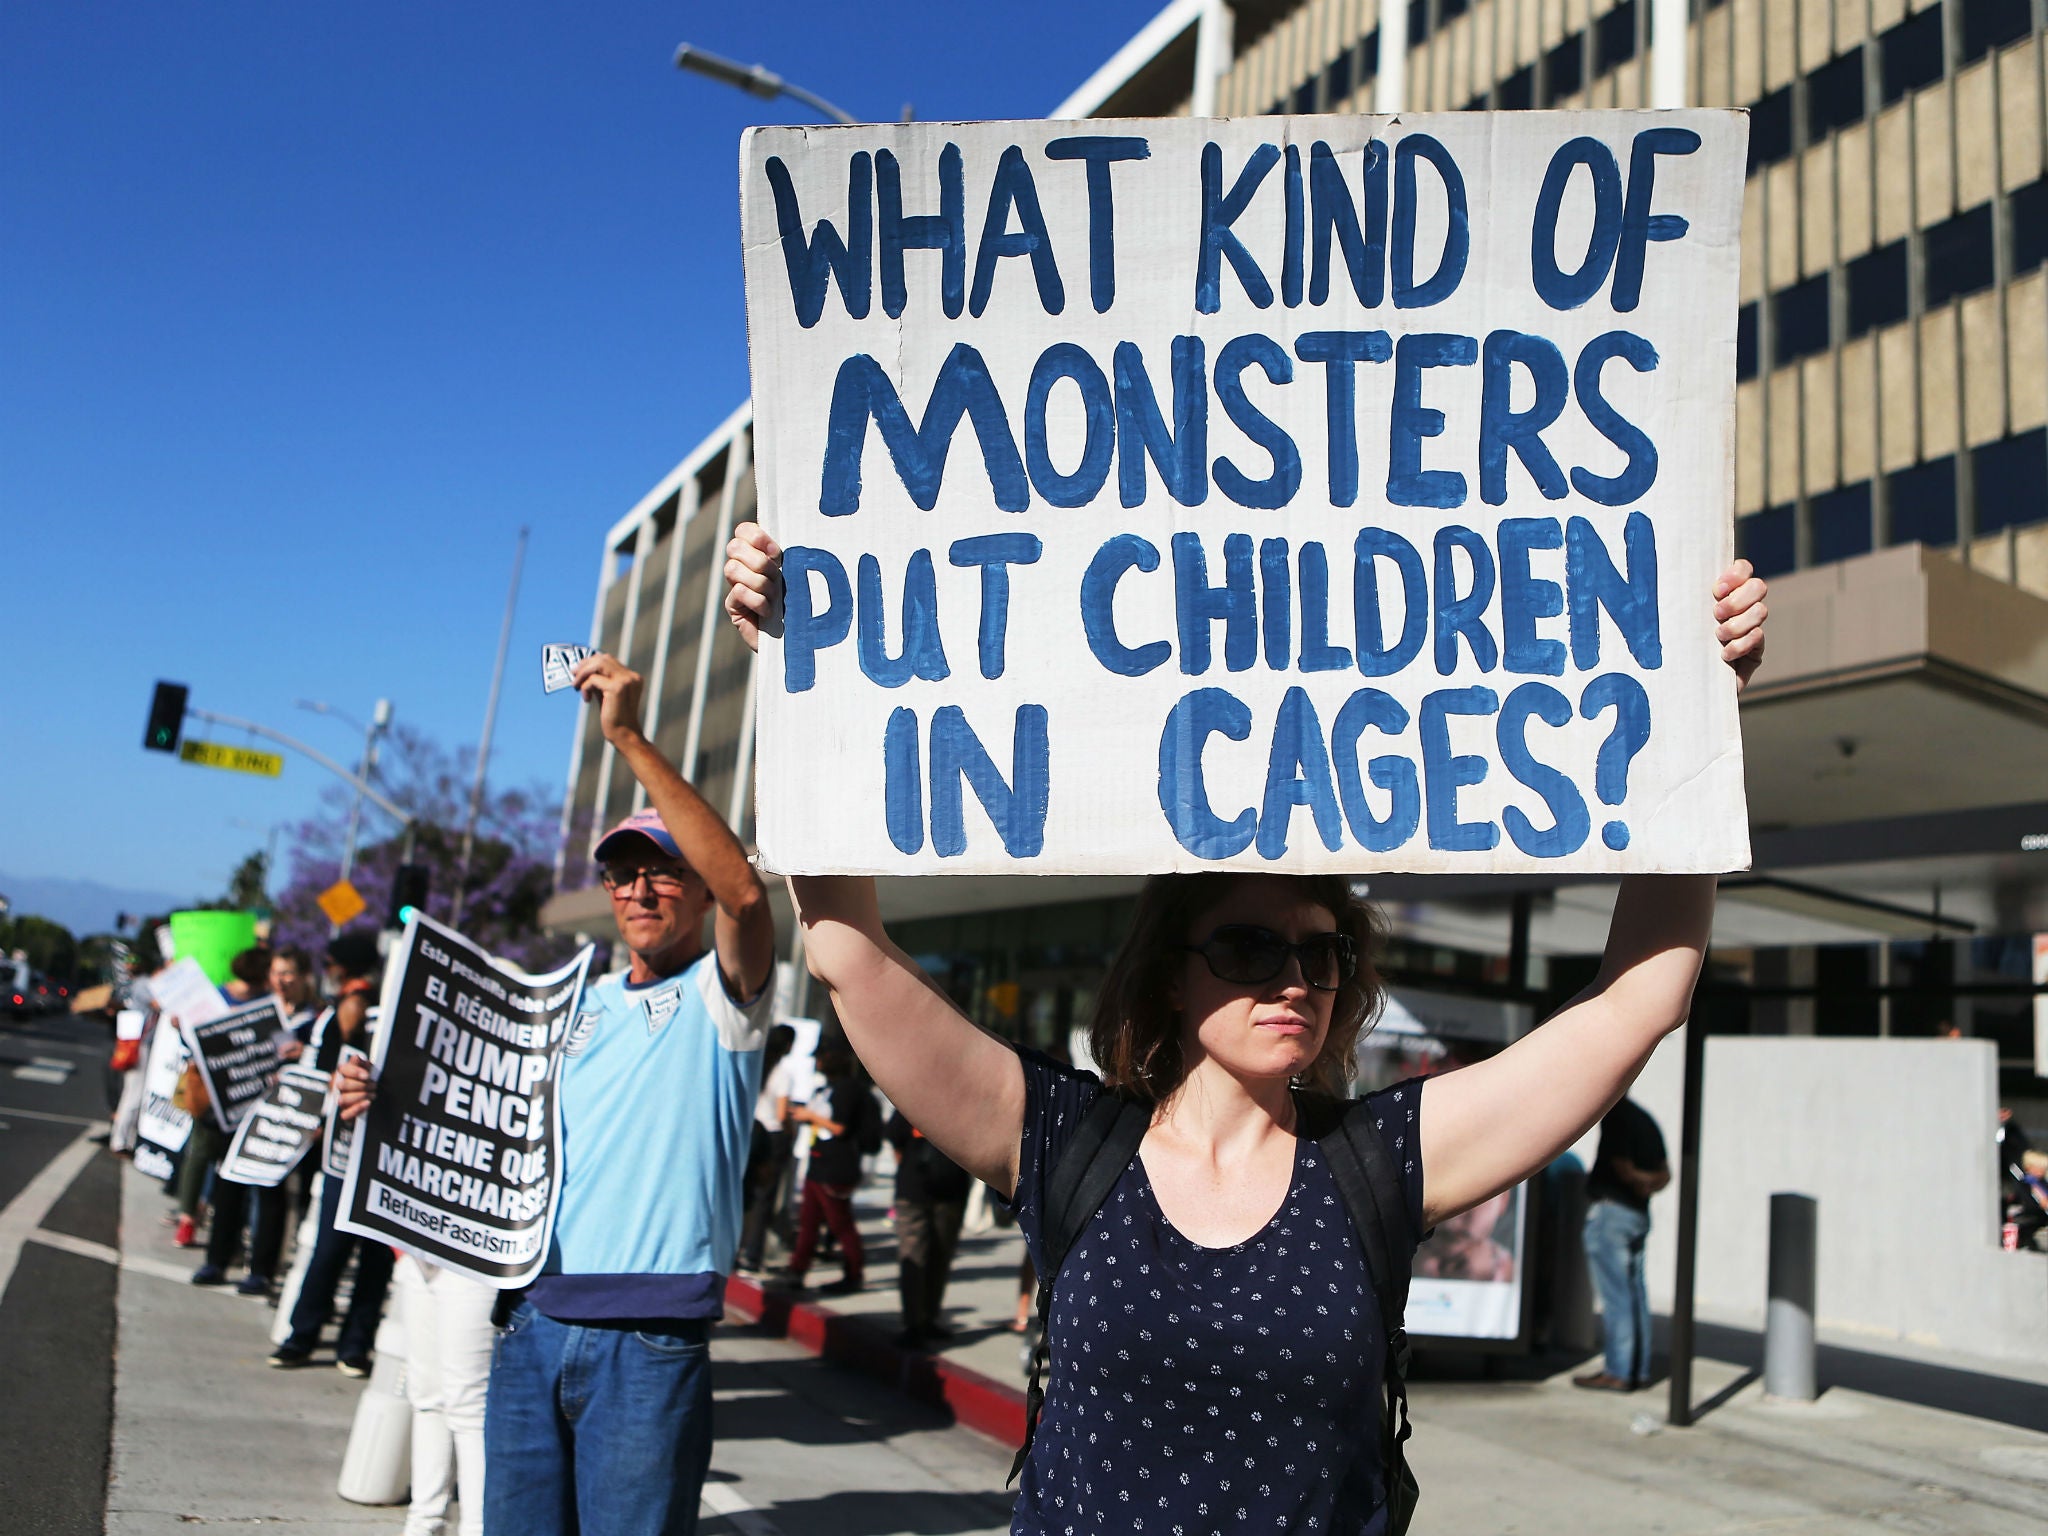 Protestors demonstrate against the separation of migrant children from their families in front of the Federal Building in Los Angeles, California.